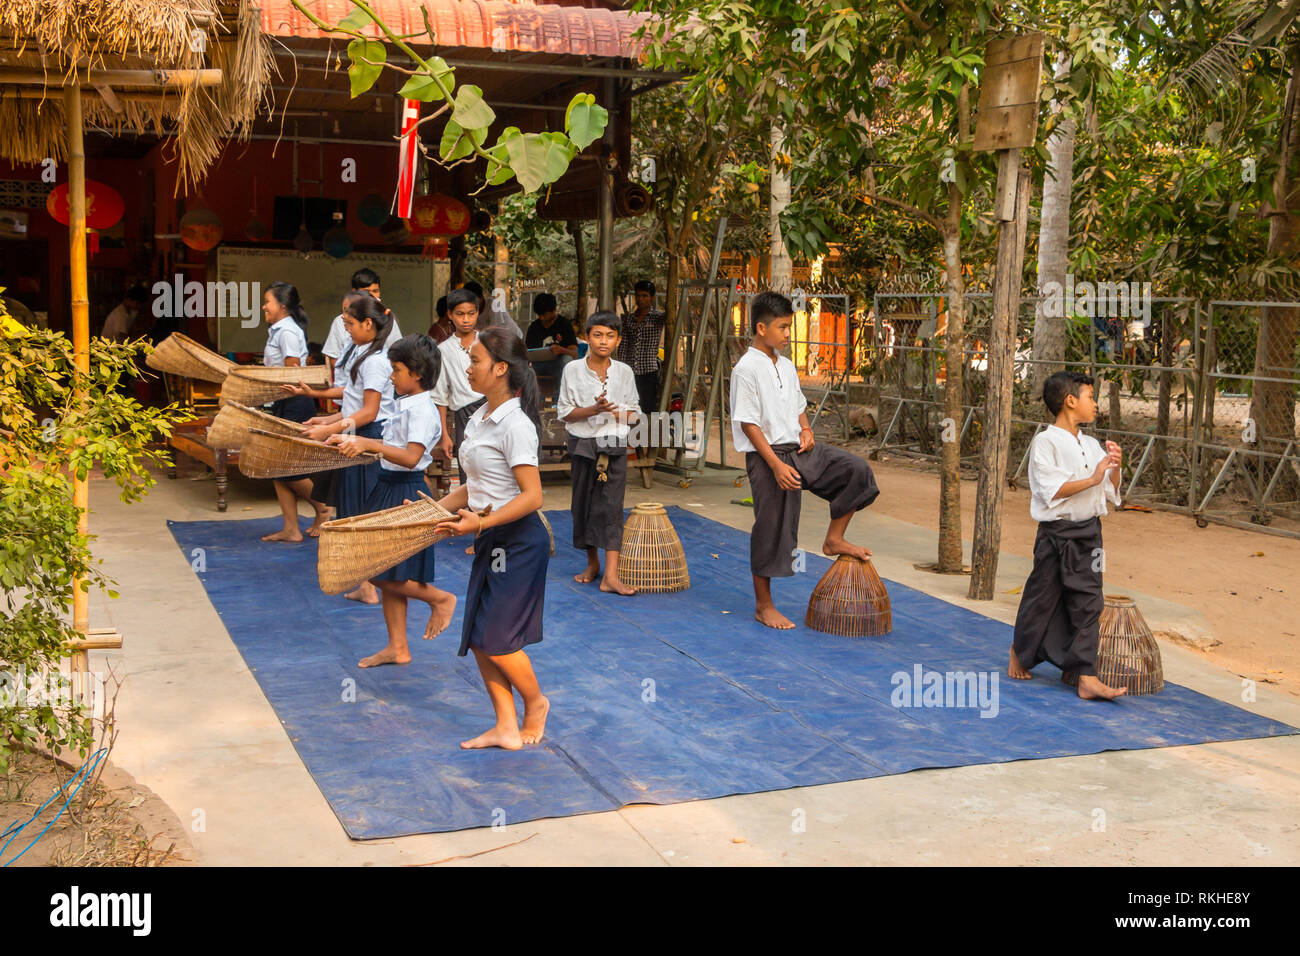 Cambodan school children wearing school uniform, perform traditional dance for tourists at Siem Reap, Cambodia, Asia Stock Photo